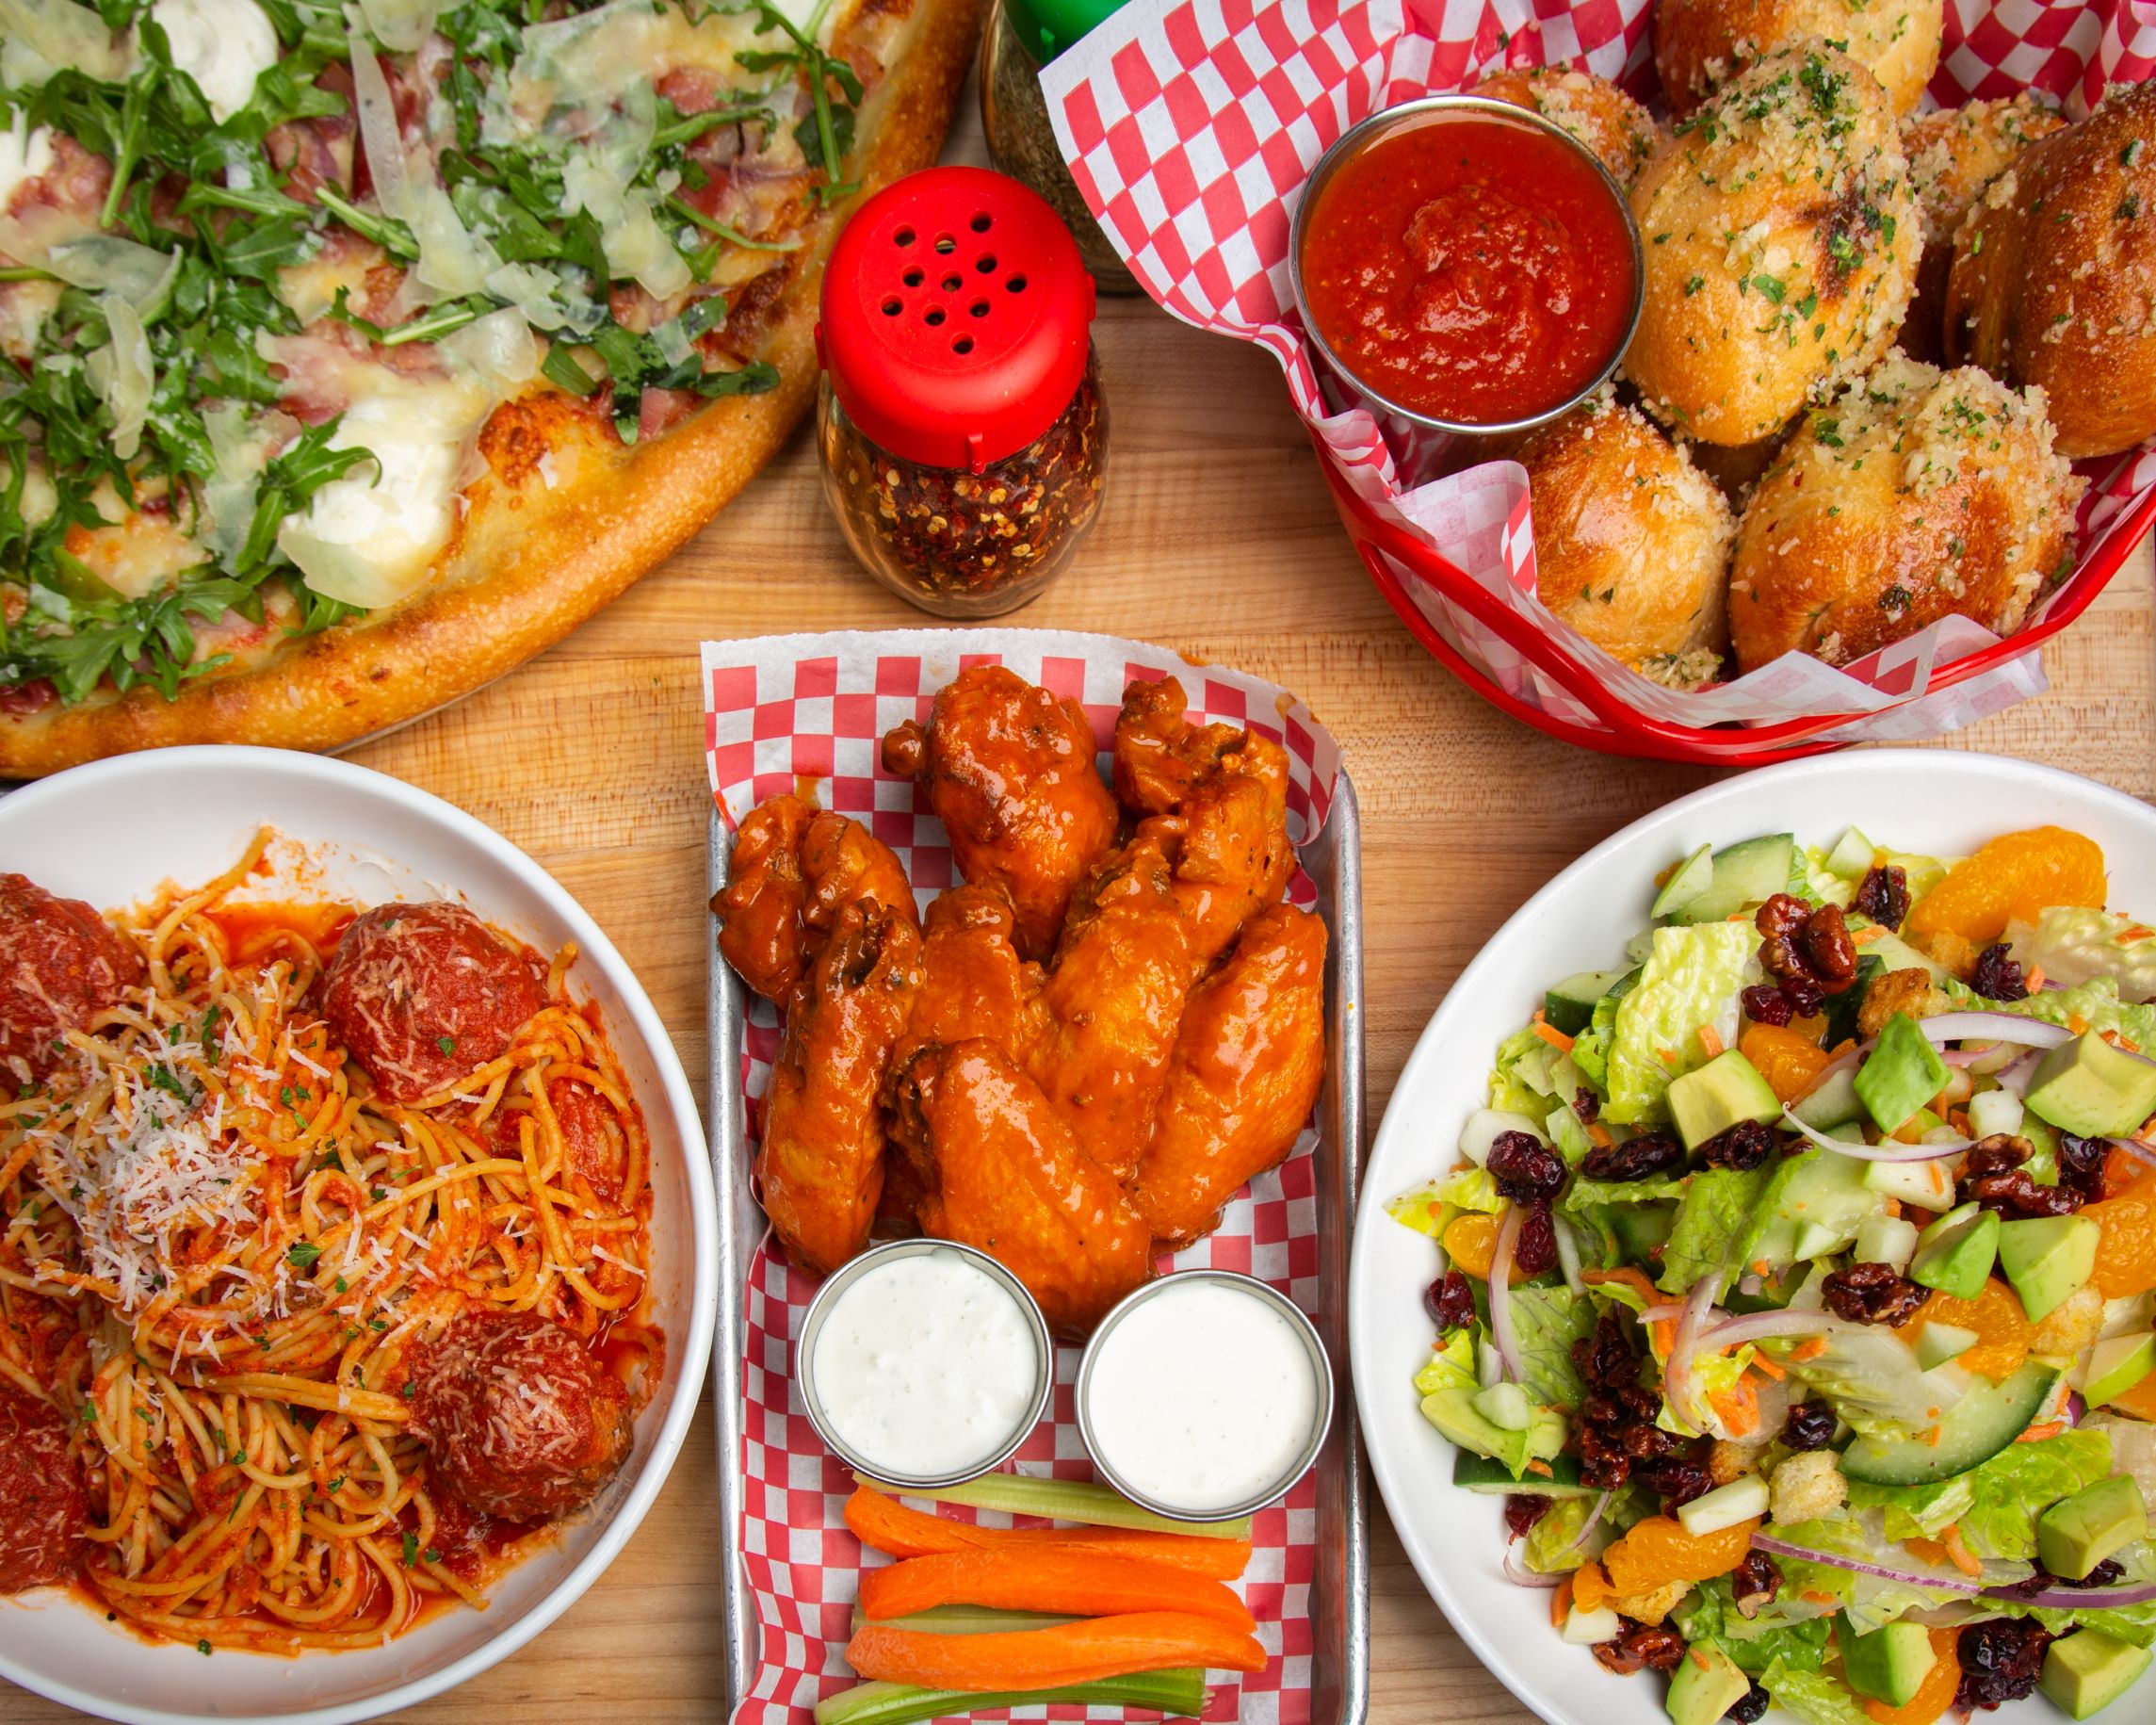 Slice of Vegas photo with pizza, garlic knots, wings, salad and spaghetti and meatballs